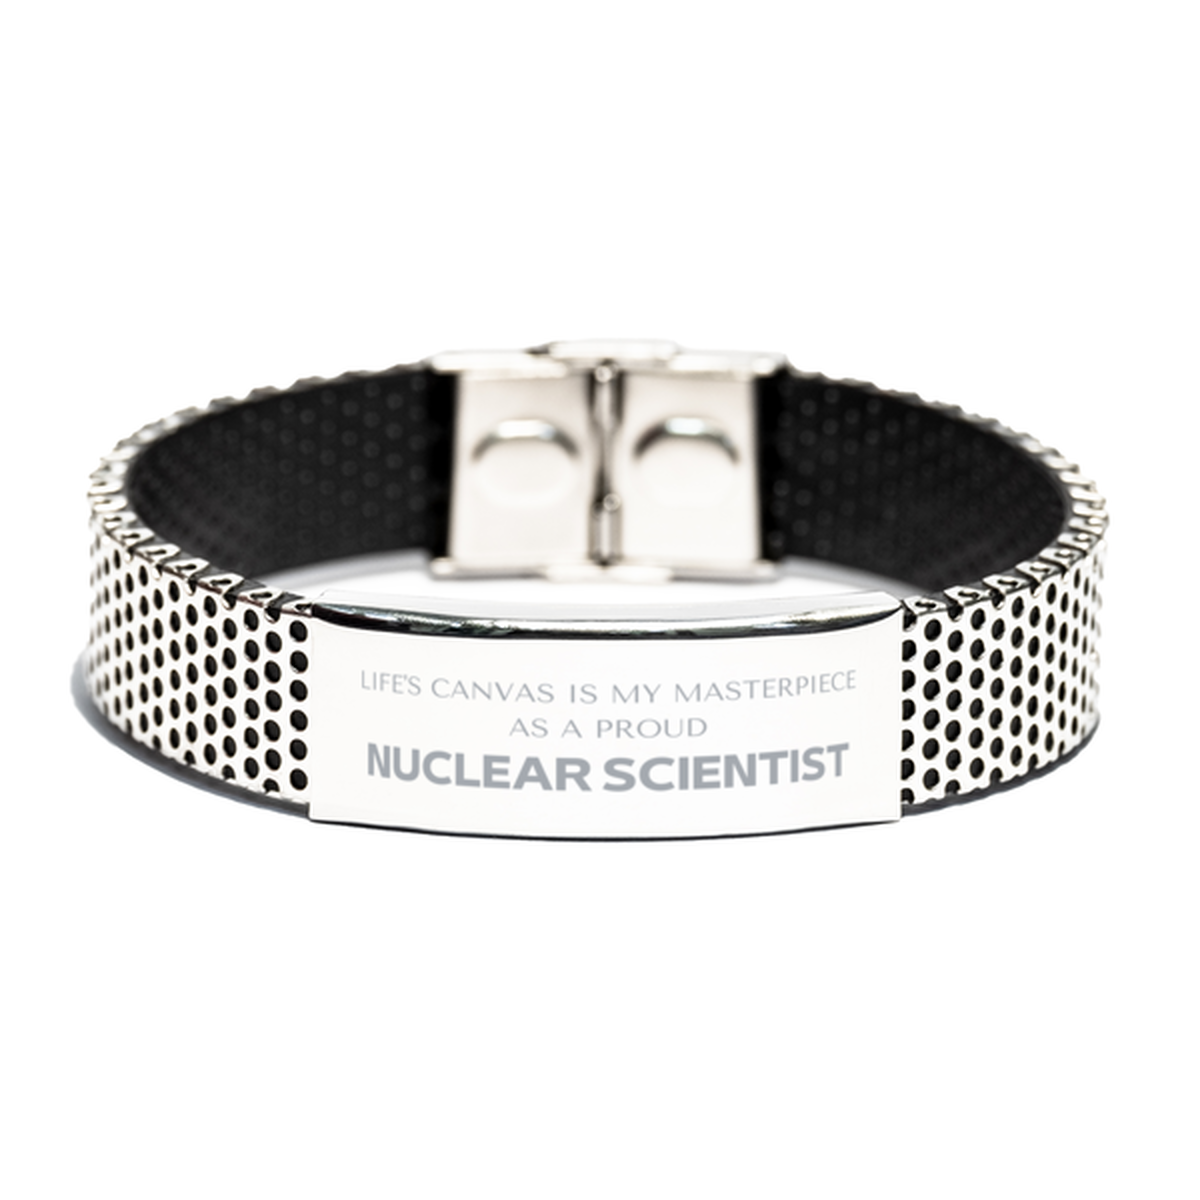 Proud Nuclear Scientist Gifts, Life's canvas is my masterpiece, Epic Birthday Christmas Unique Stainless Steel Bracelet For Nuclear Scientist, Coworkers, Men, Women, Friends